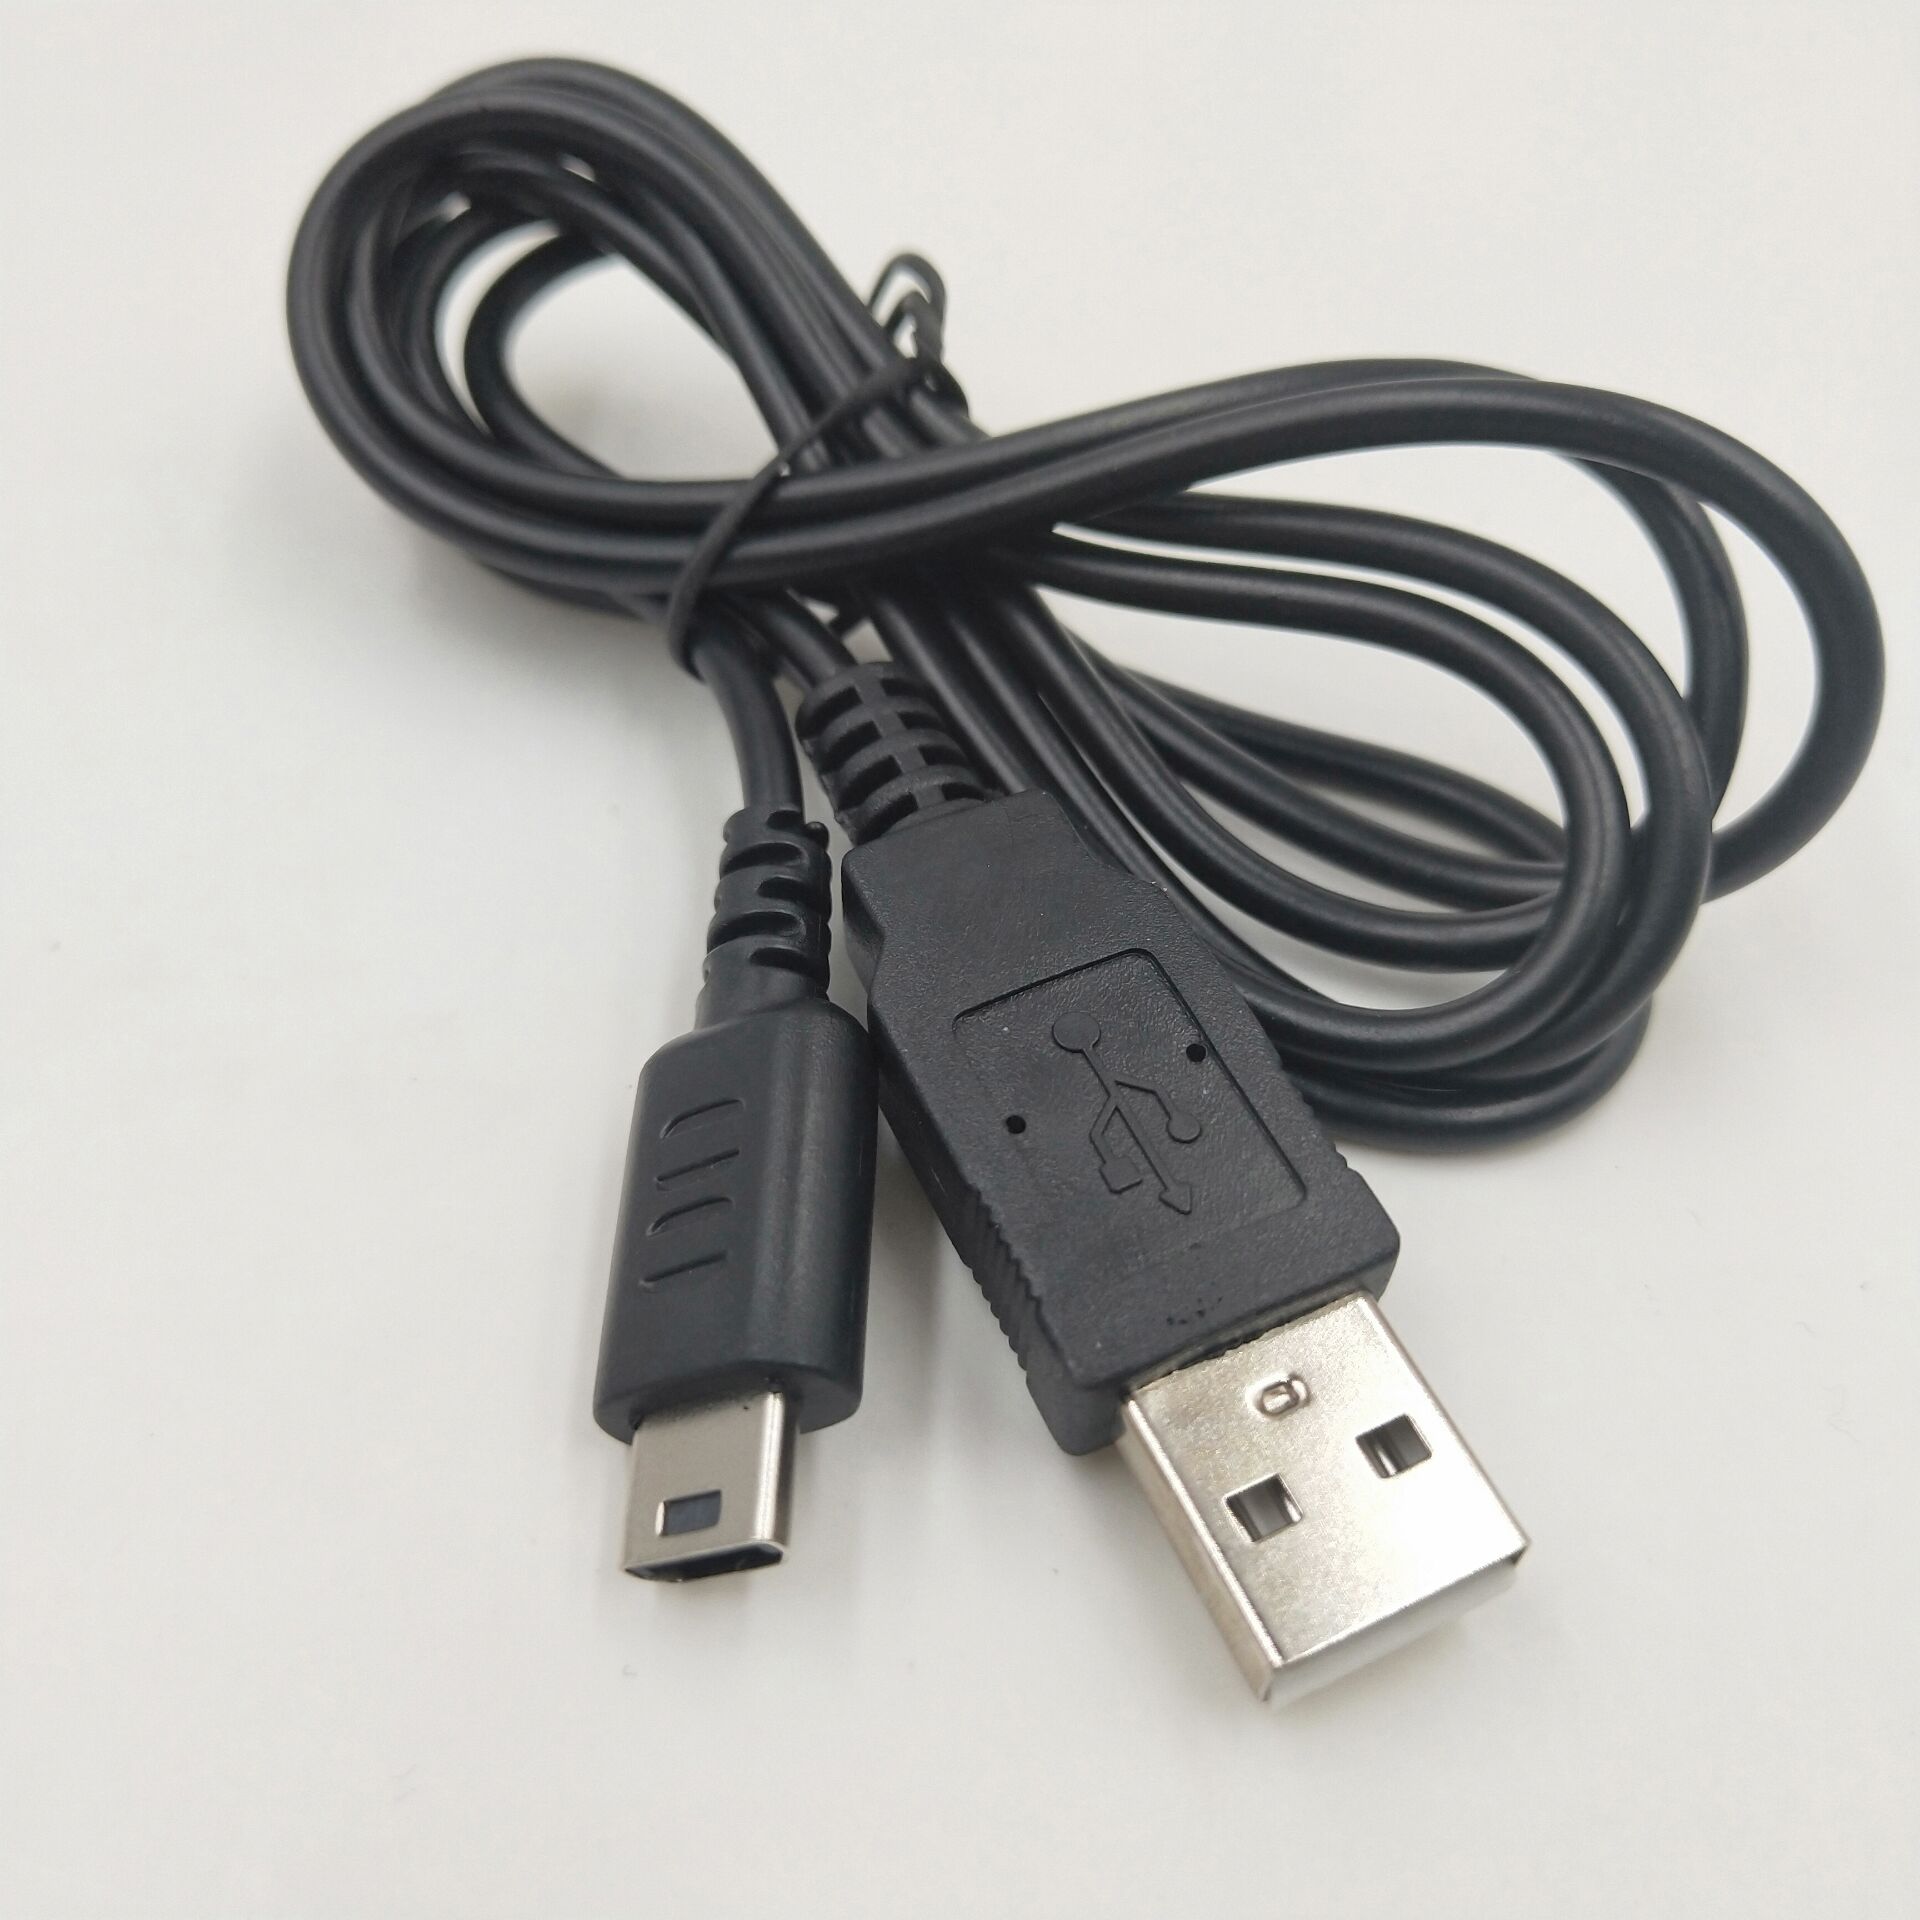 1.2M Black Color USB Cables Charger Charging Power Cable for Nintendo DS Lite DSL NDSL Data Sync Cable Cord